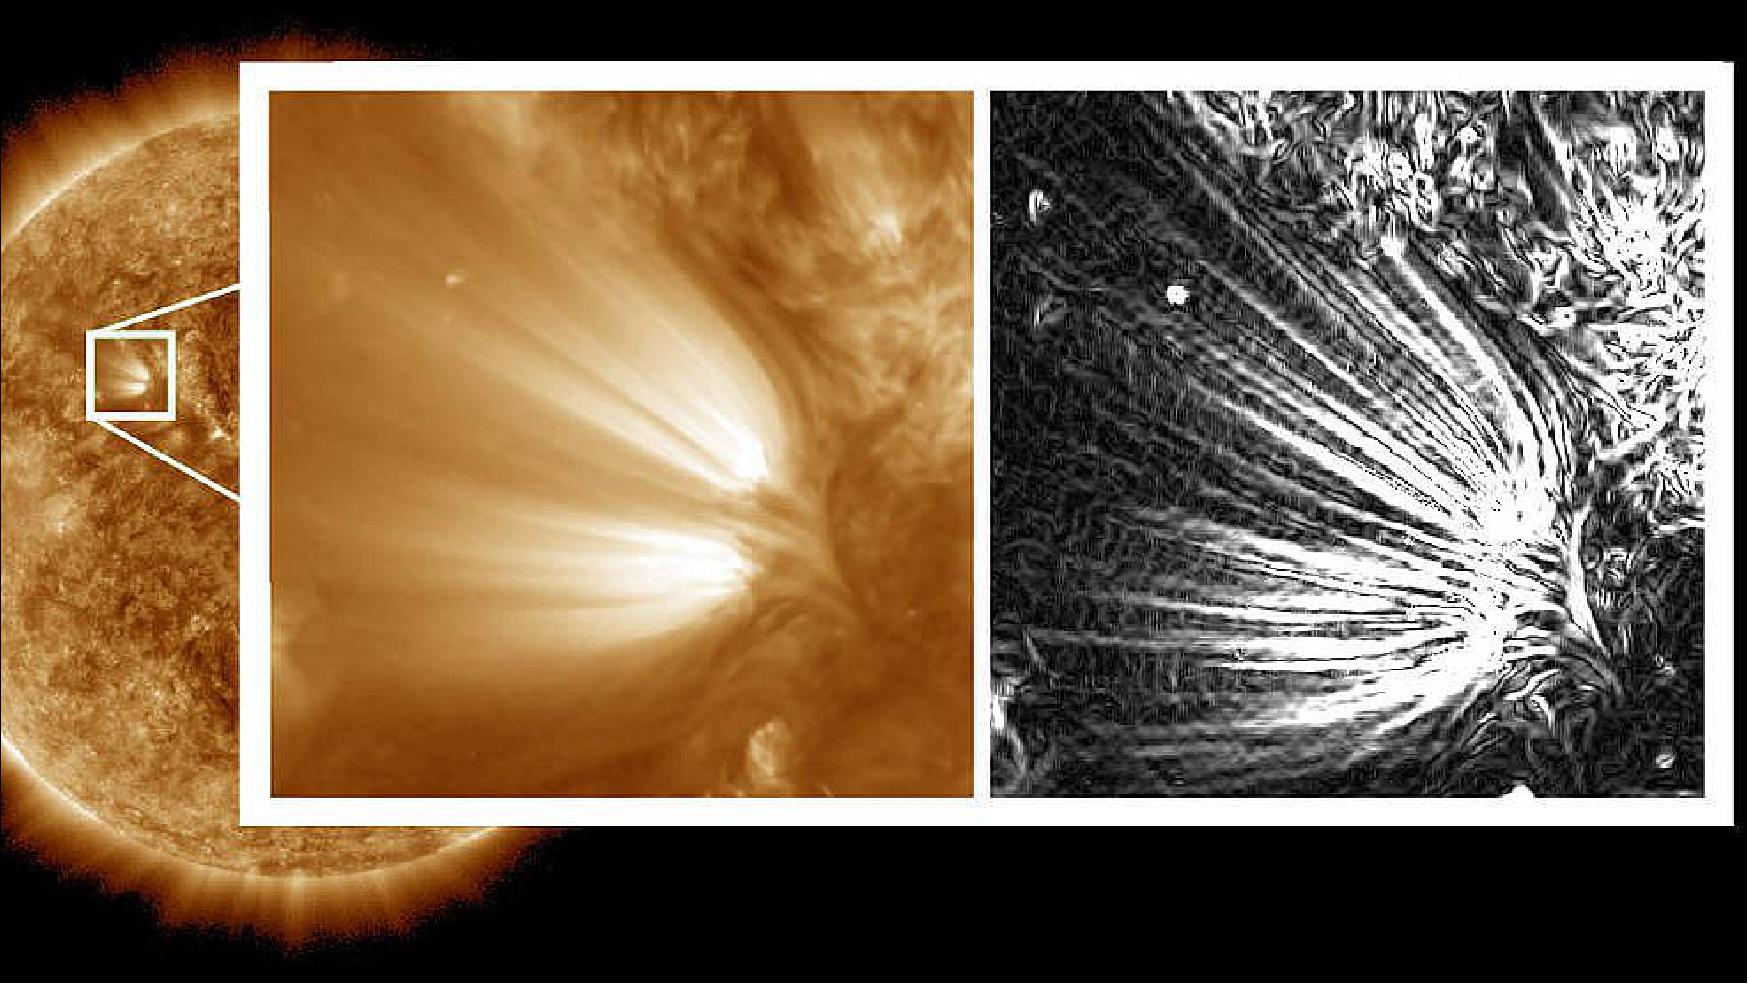 Figure 25: Scientists used image processing on high-resolution images of the Sun to reveal distinct "plumelets" within structures on the Sun called solar plumes. The full-disk Sun and the left side of the inset image were captured by NASA's SDO in a wavelength of extreme ultraviolet light and processed to reduce noise. The right side of the inset has been further processed to enhance small features in the images, revealing the edges of the plumelets in clear detail. These plumelets could help scientists understand how and why disturbances in the solar wind form (image credits: NASA/SDO/Uritsky, et al.)